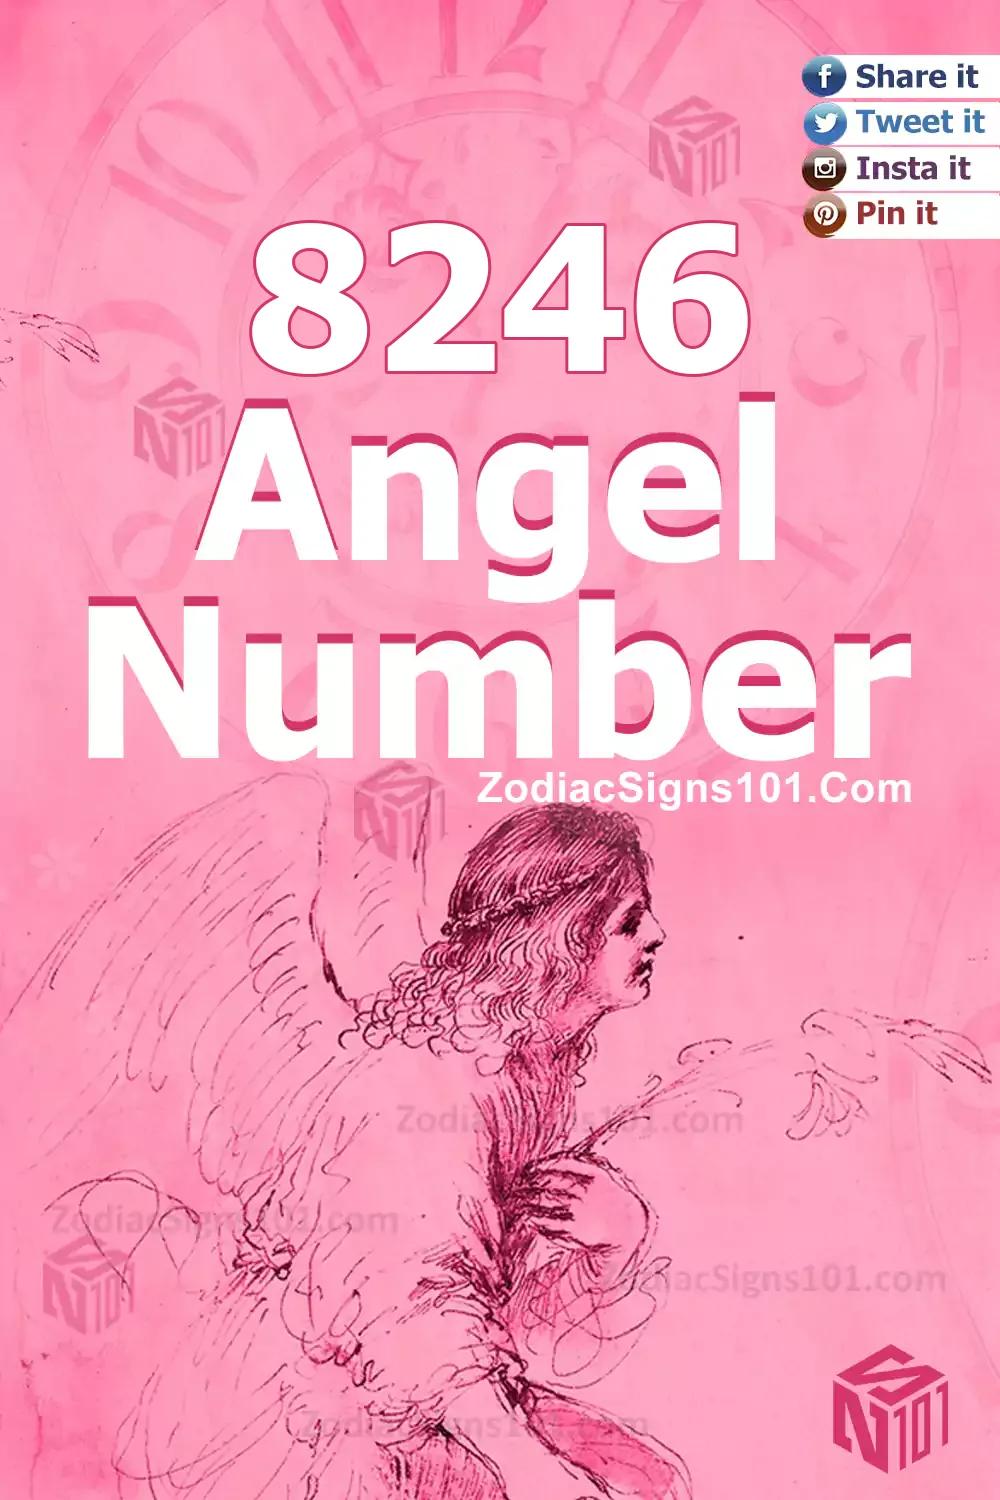 8246 Angel Number Meaning